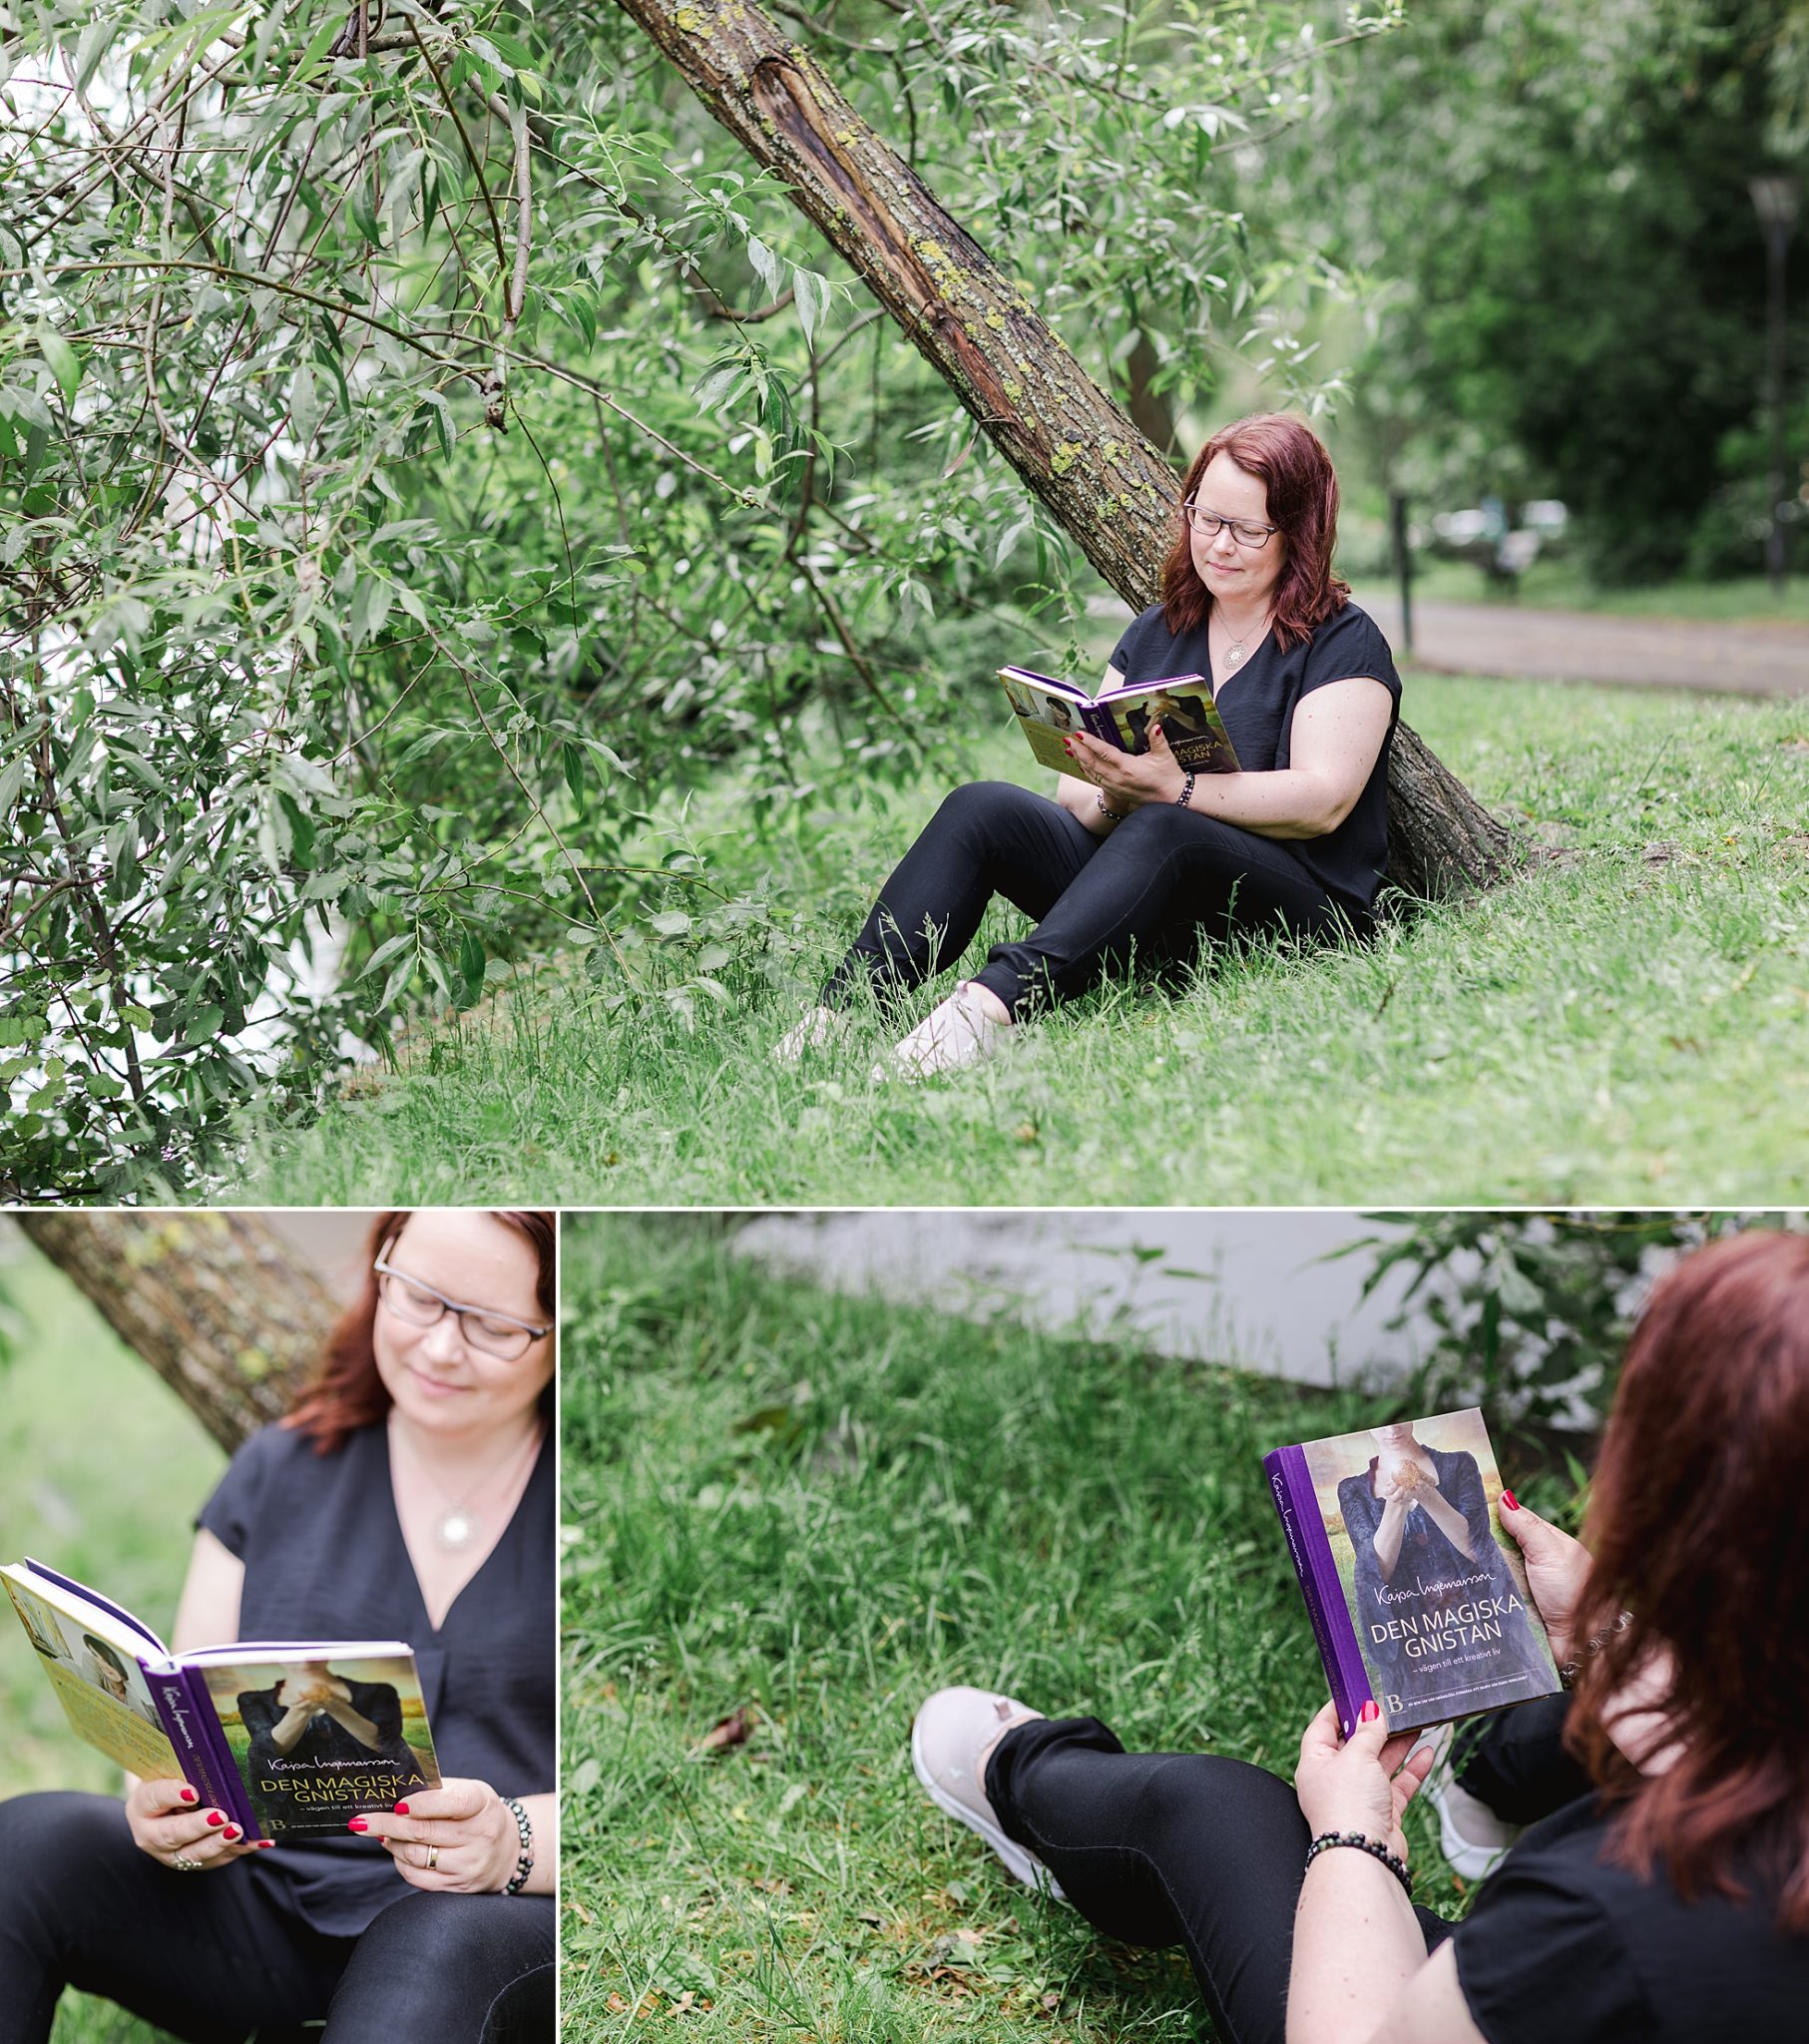 A woman sitting in a park reading a book